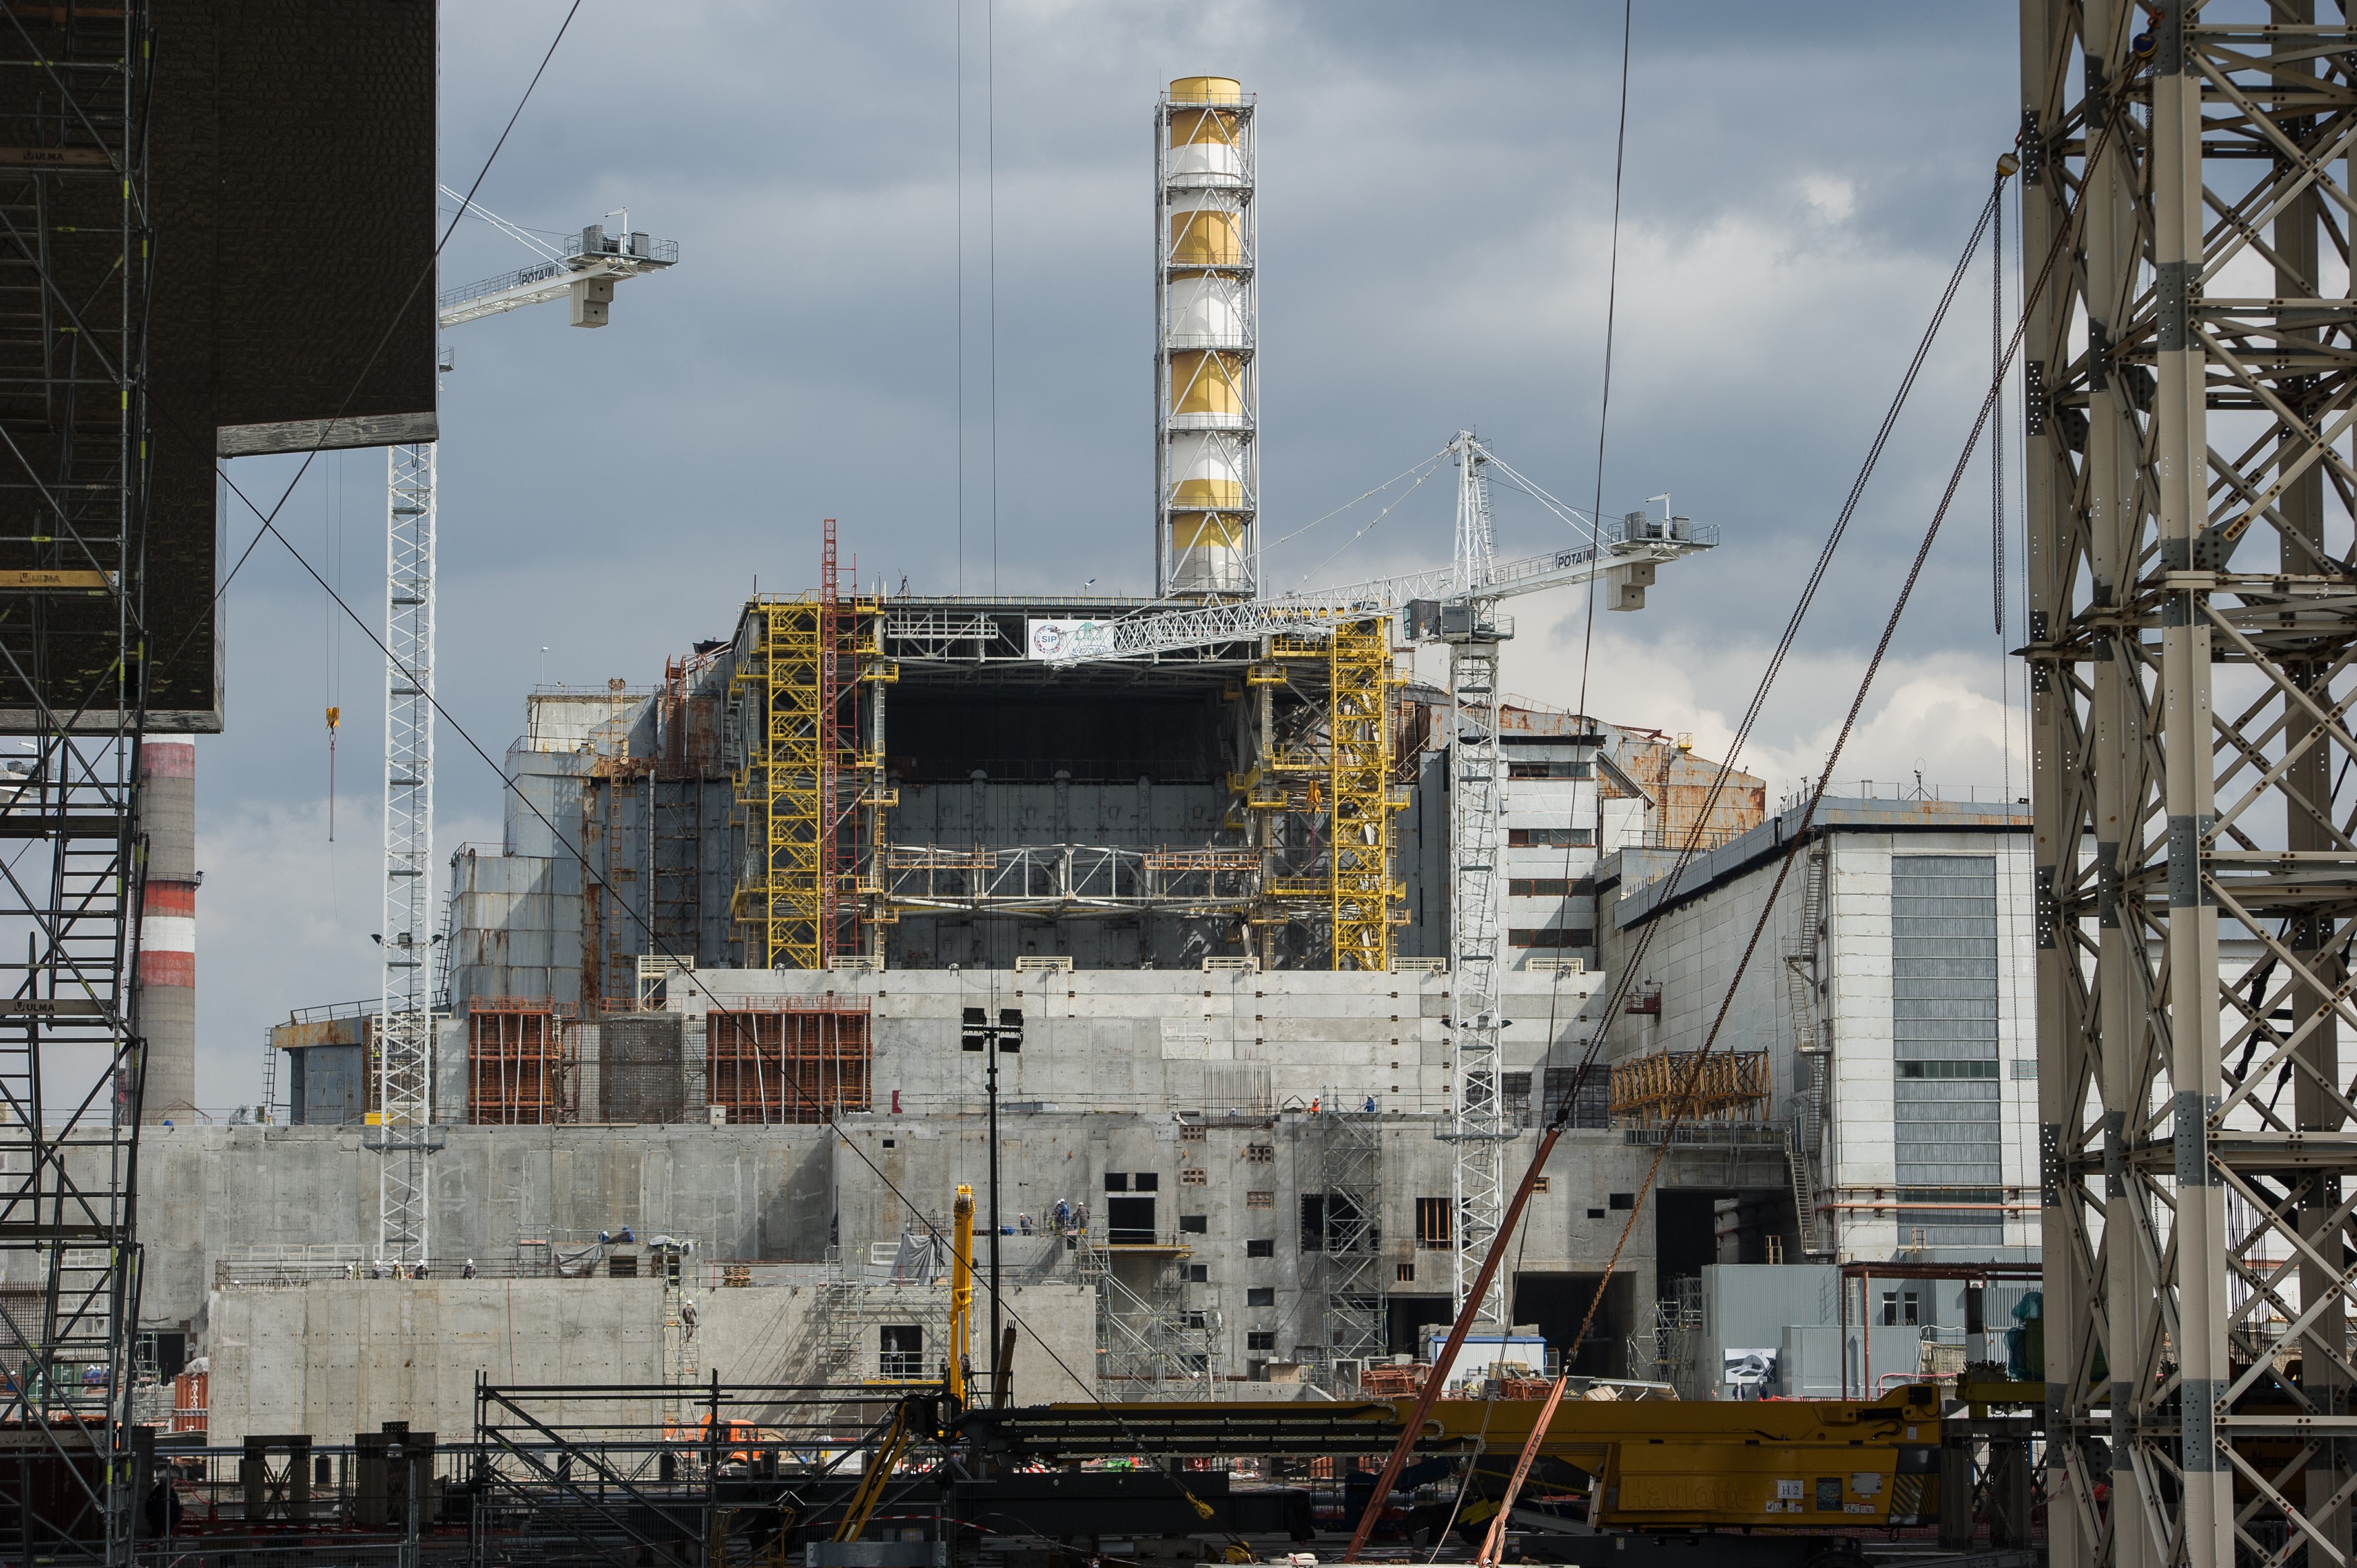 The fourth reactor of the Chernobyl Nuclear Power Plant is seen through the New Safe Confinement in Chernobyl, Ukraine, April 22, 2016. (Alexey Furman—Anadolu Agency/Getty Images)